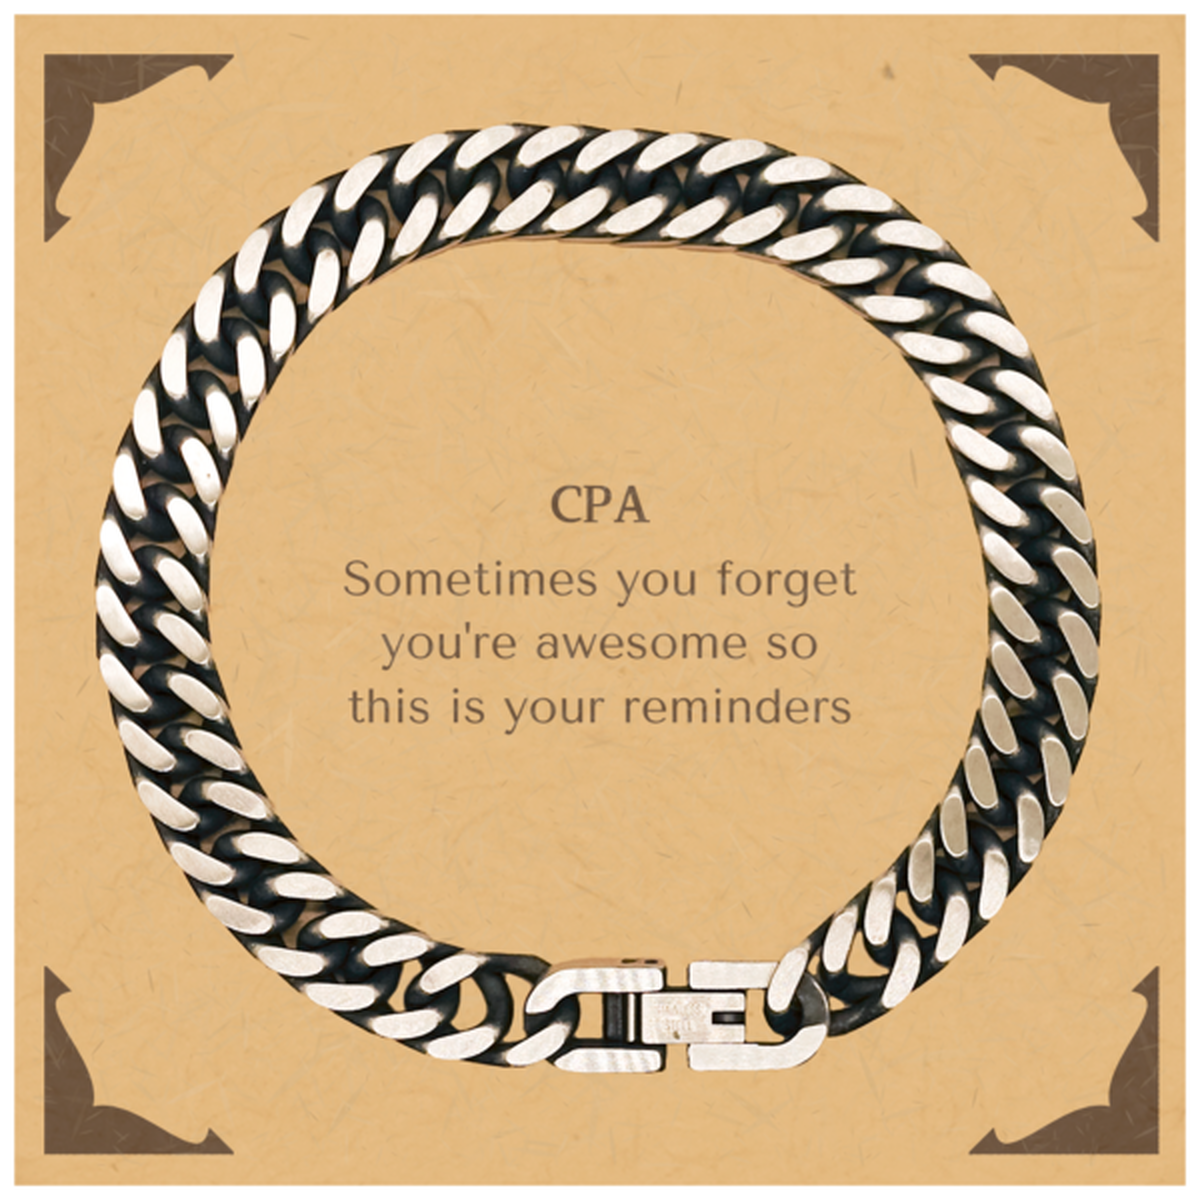 Sentimental CPA Cuban Link Chain Bracelet, CPA Sometimes you forget you're awesome so this is your reminders, Graduation Christmas Birthday Gifts for CPA, Men, Women, Coworkers